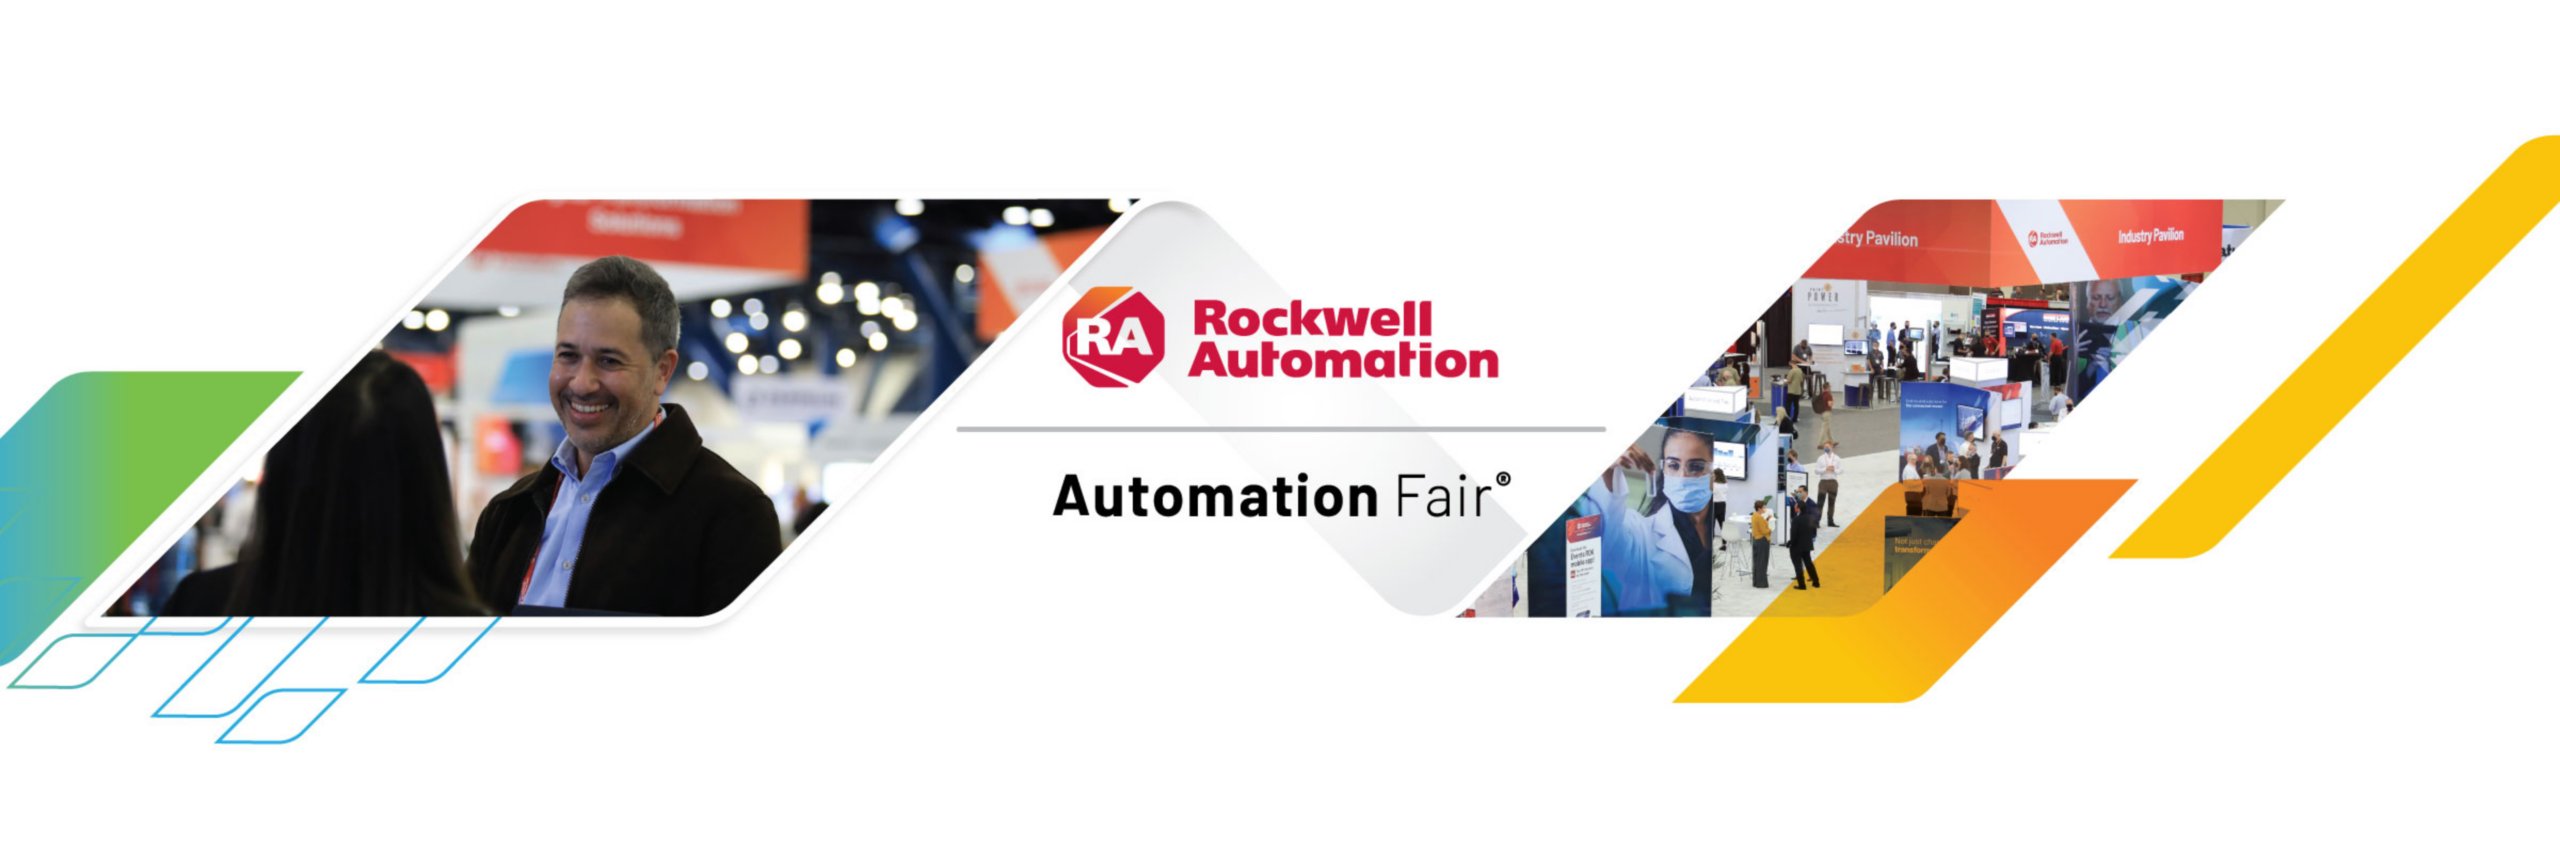 Automation Fair logo with an image of a male and female conversing on the left and an image on the right of an overview shot of the Automation Fair event expo with exhibits and people interacting.